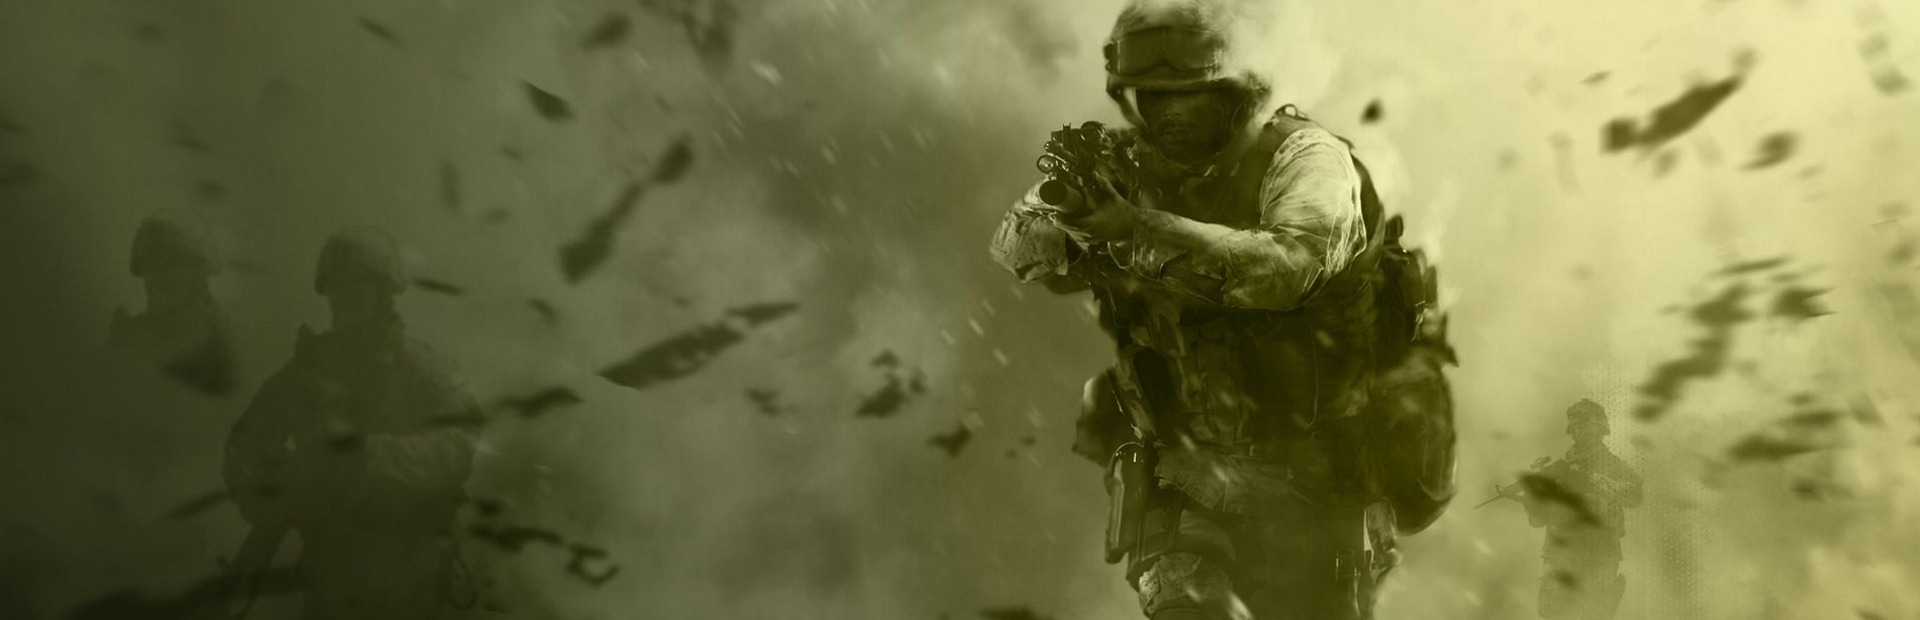 Call of Duty: Modern Warfare 2 Campaign Remastered Download